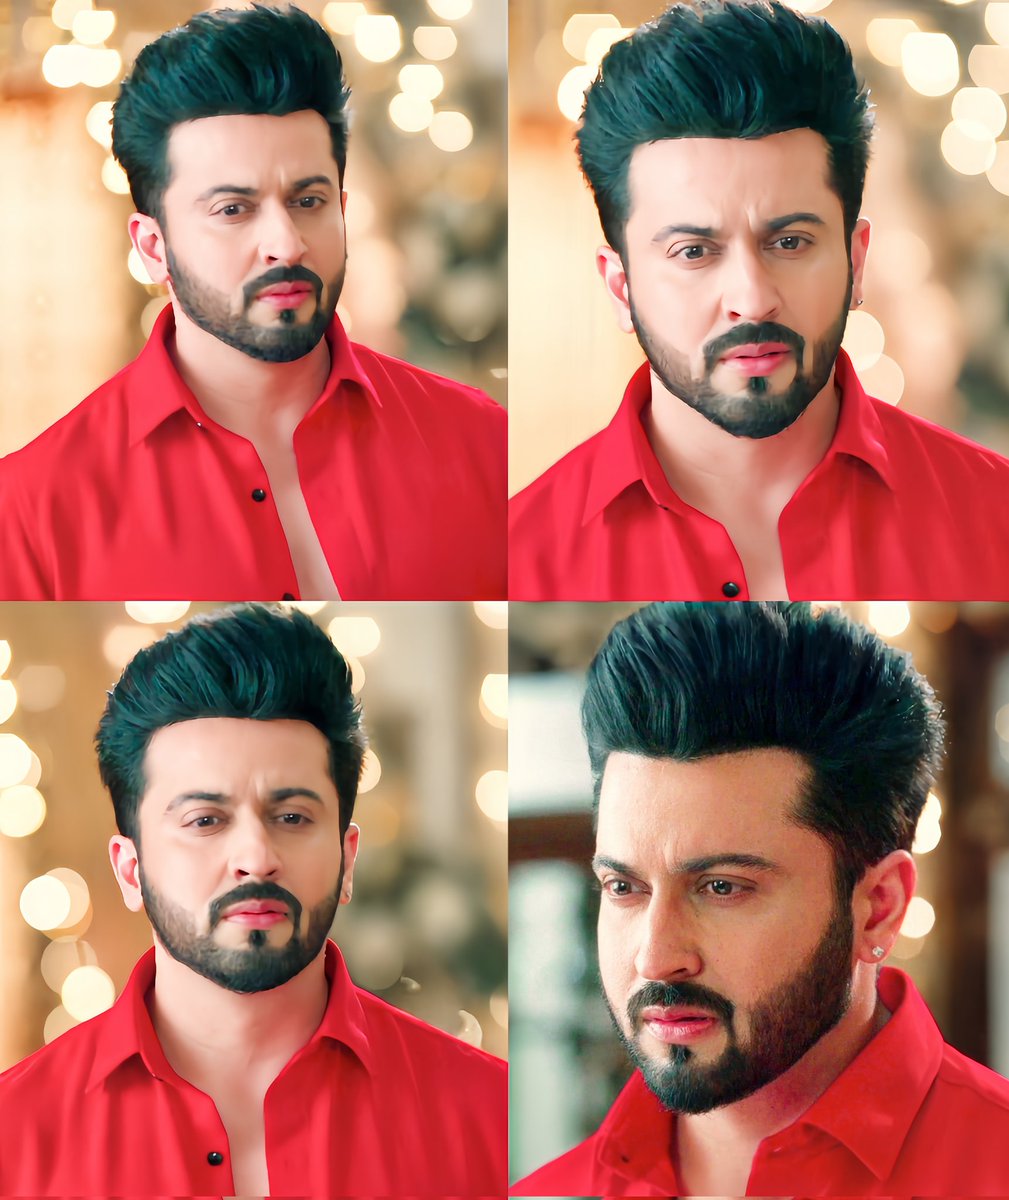 #DheerajDhoopar as #SubhaanSiddiqui in today’s episode left a lasting impression. His hot red shirt, combined with his killer expressions and confident walk, created a memorable and iconic moment that fans will talk about for a long time❤🙌
#RabbSeHaiDua ❤